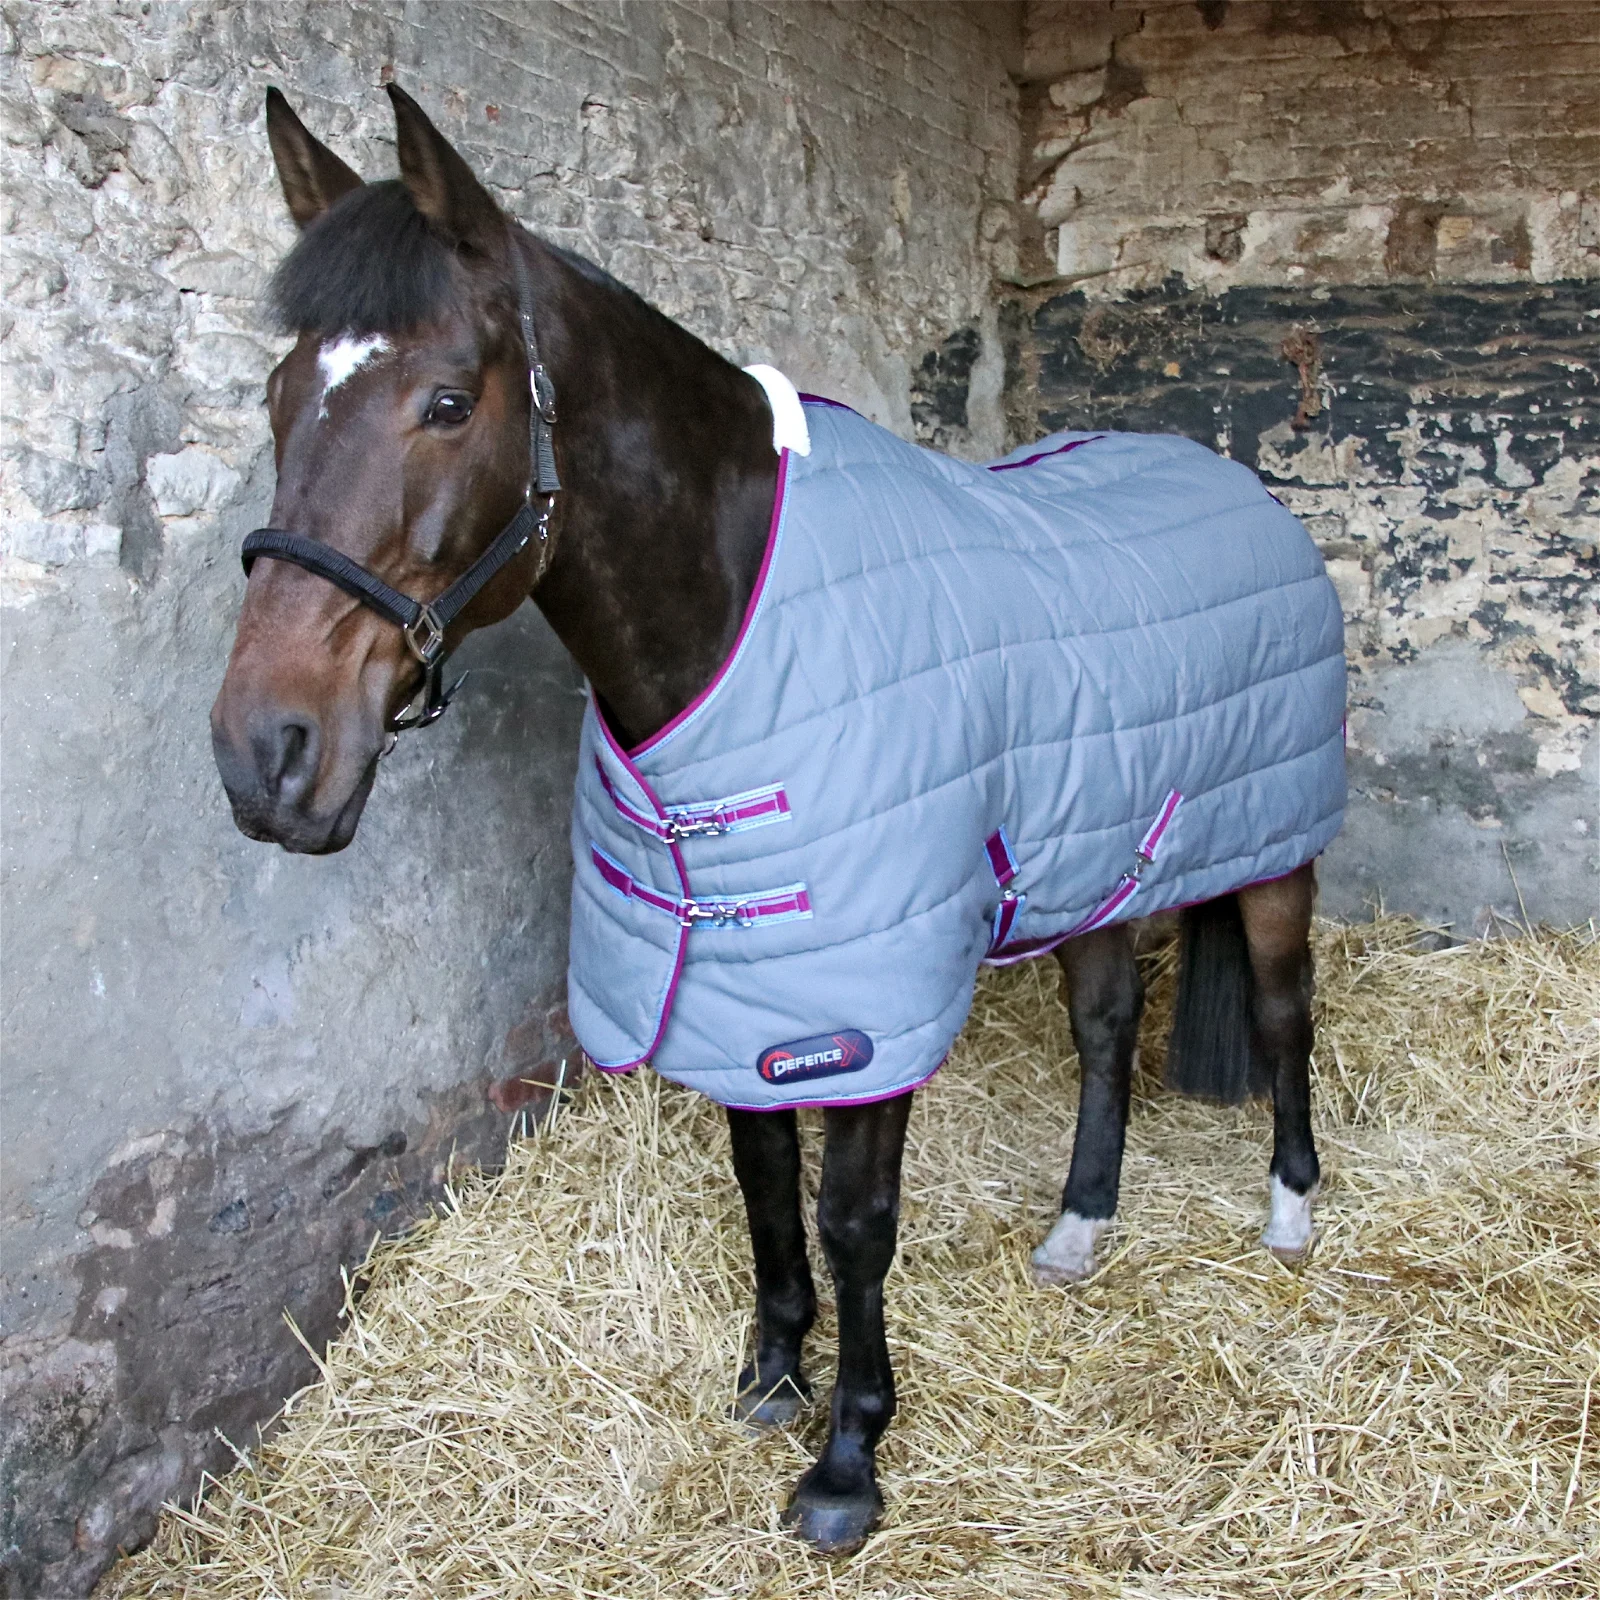 300gm HEAVY WEIGHT Standard Neck HKM Quilted stable rug FREE DELIVERY 